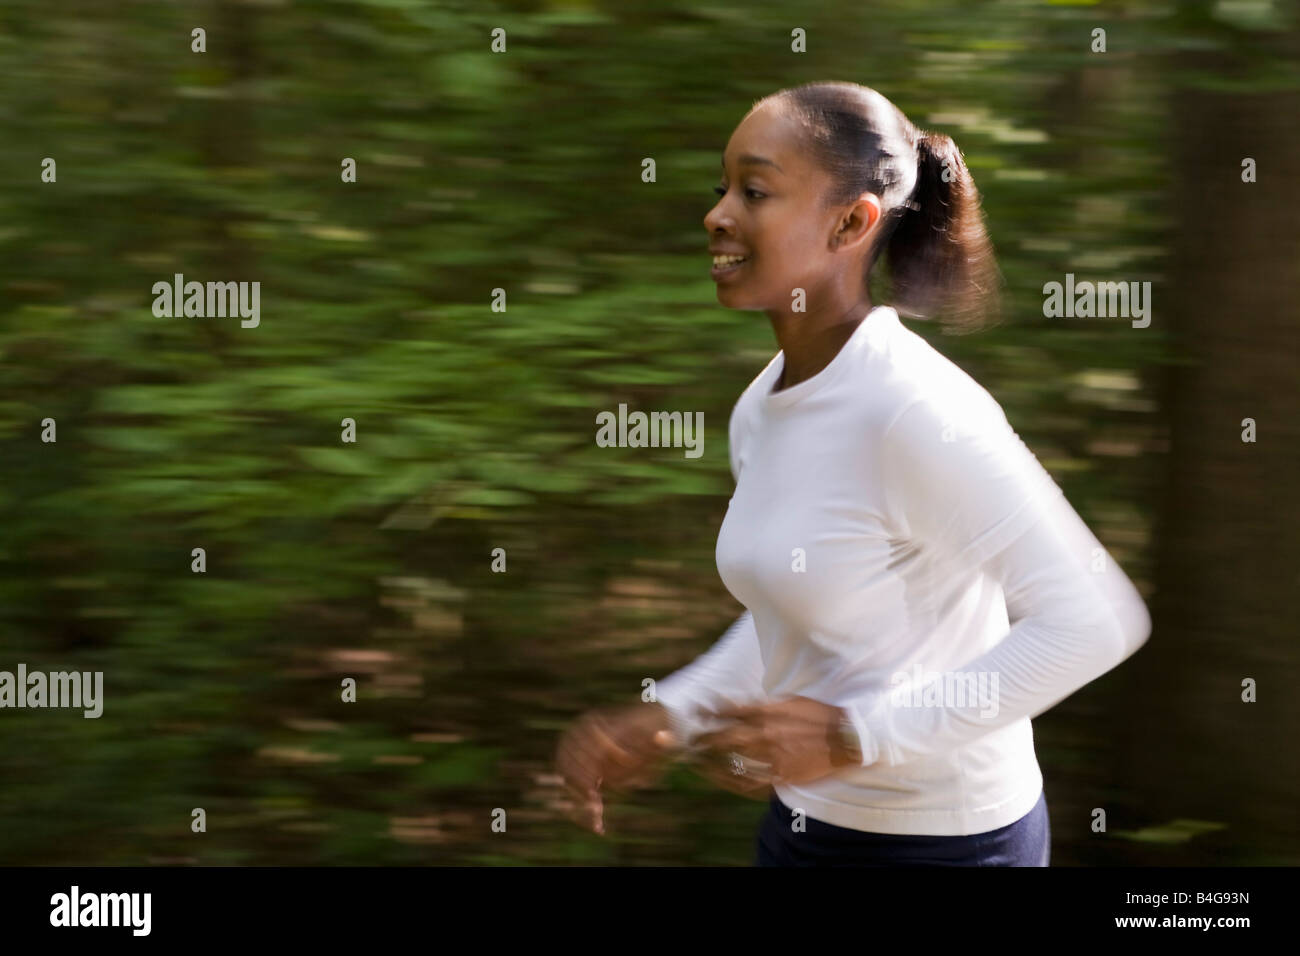 A woman jogging through wooded park Stock Photo